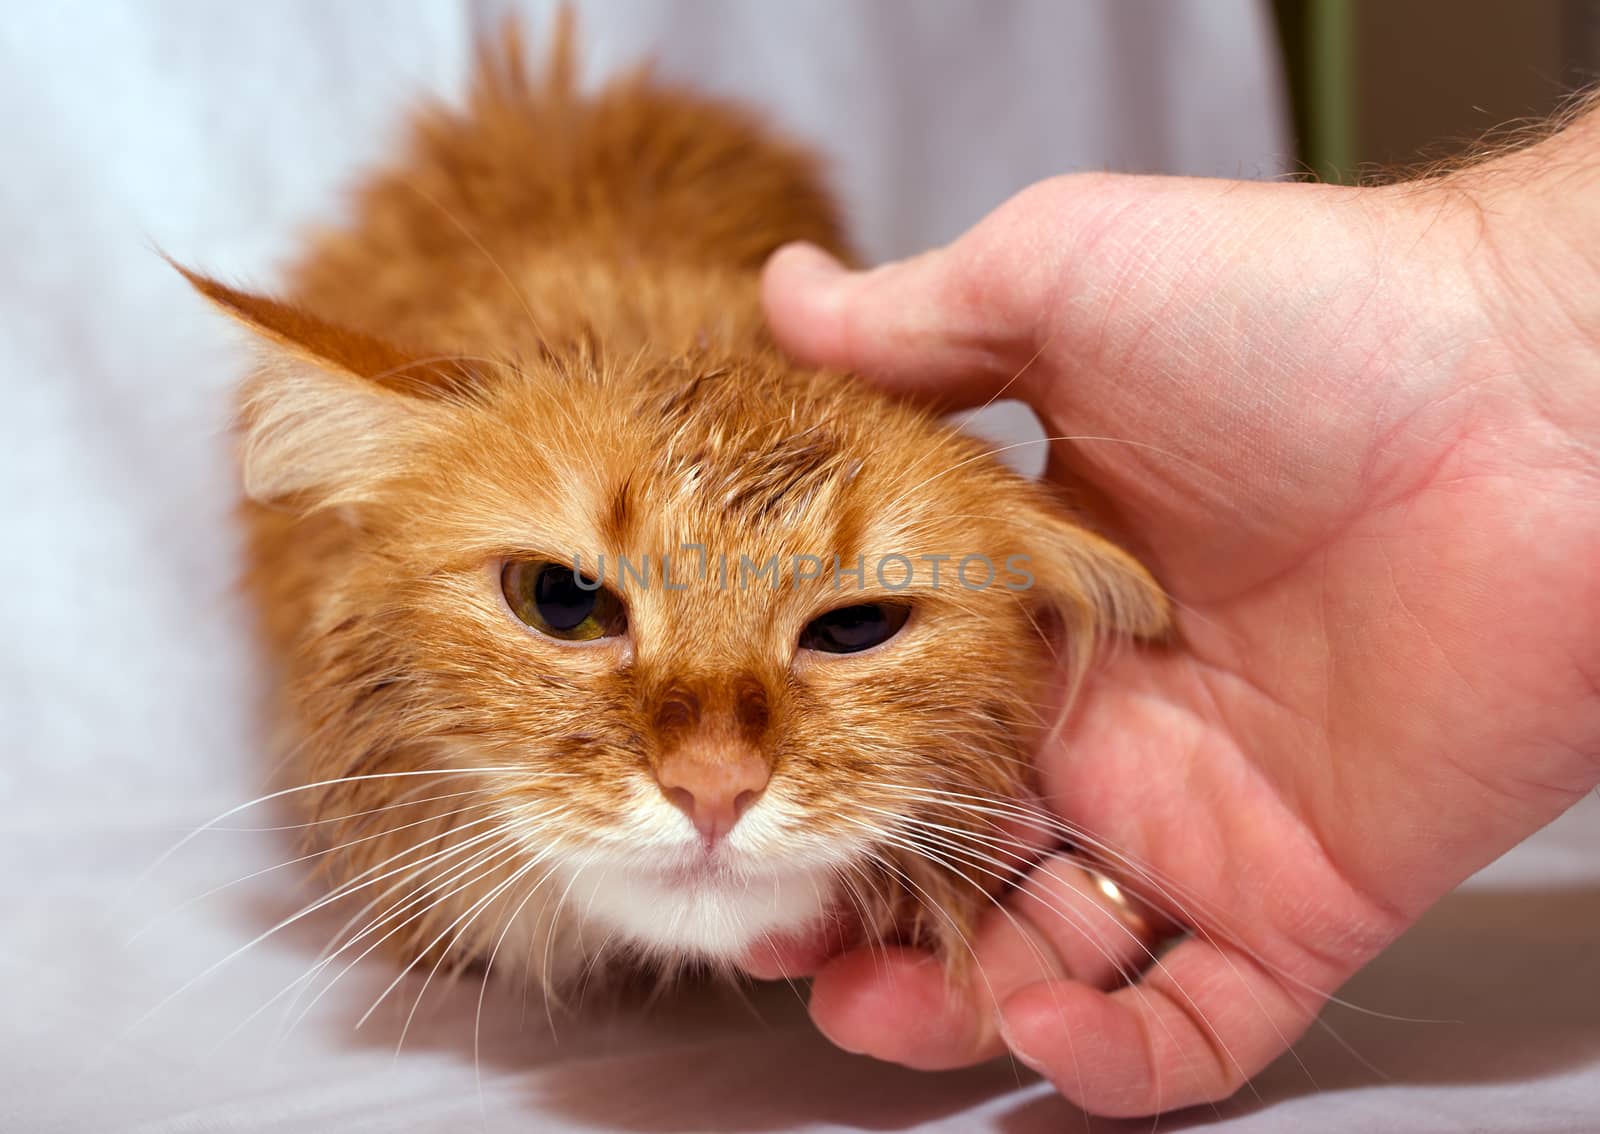 The muzzle of an animal home ginger cat that strokes the man's hand